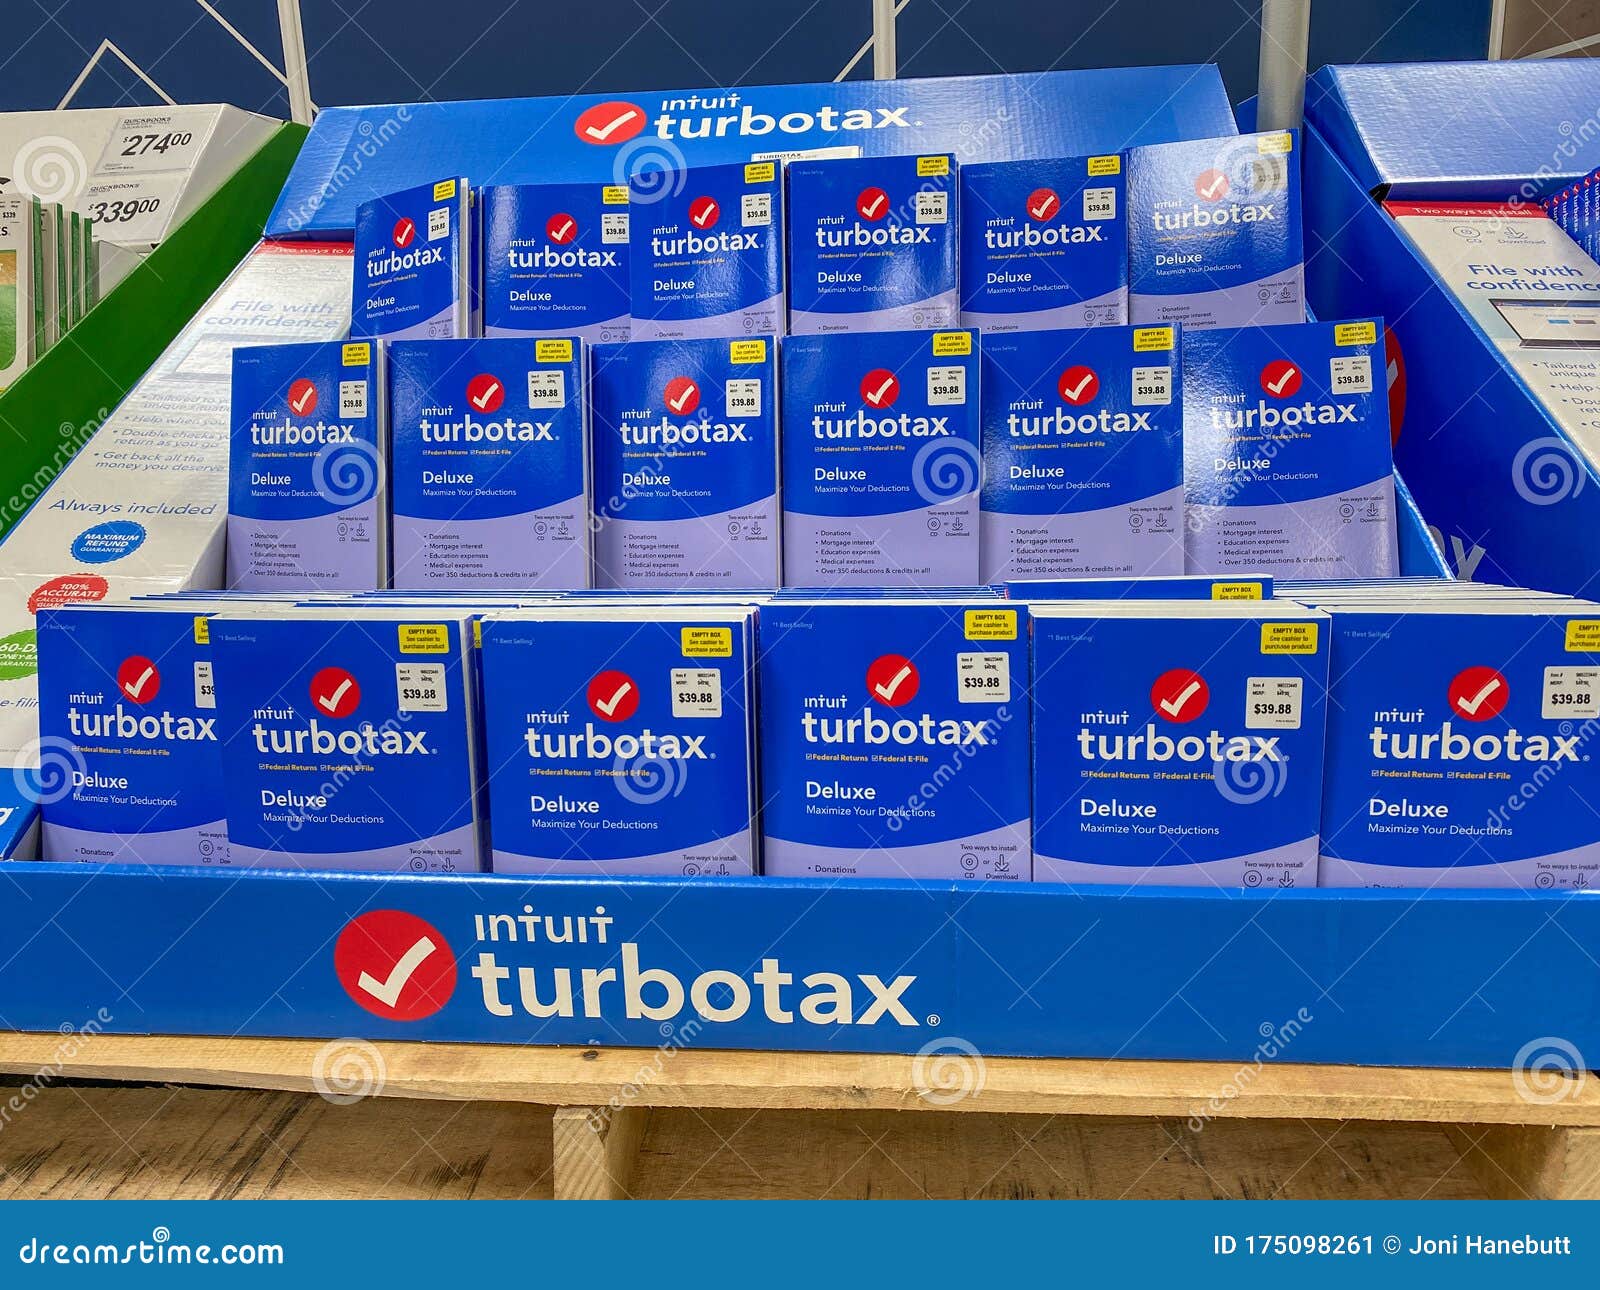 turbotax 2017 home and business costco